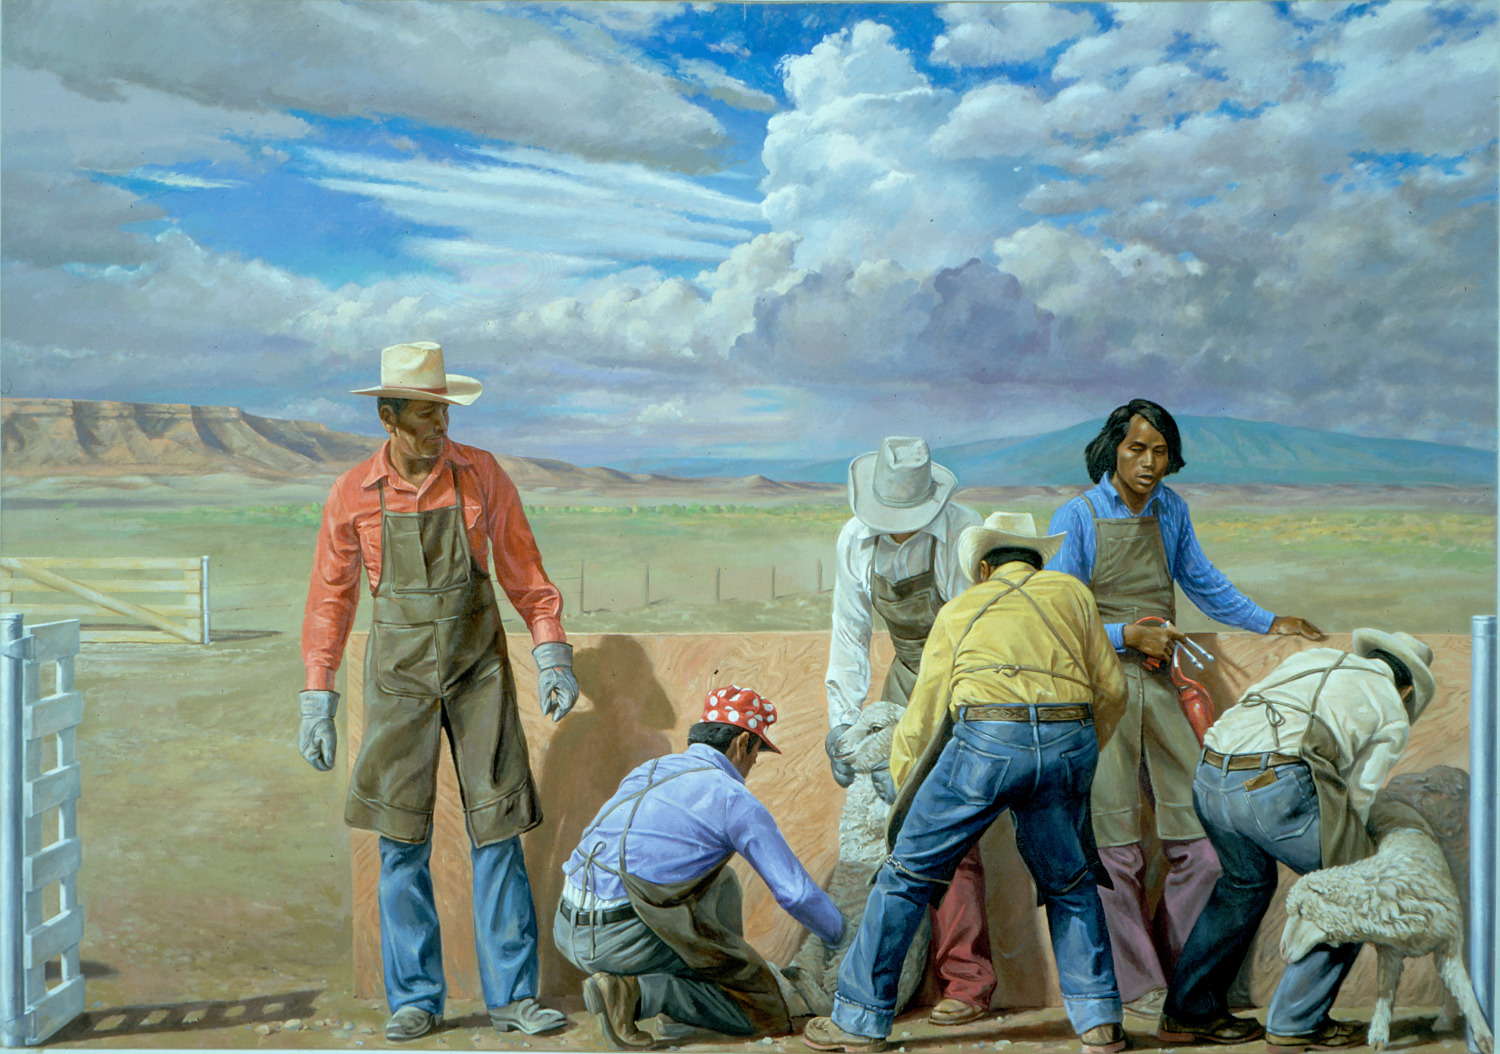 Willard Franklin Midgette, Processing Sheep (Procesamiento de ovejas), 1976. Oil on linen, Museum purchase with funds provided by Mr. and Mrs. Kemper Marley.